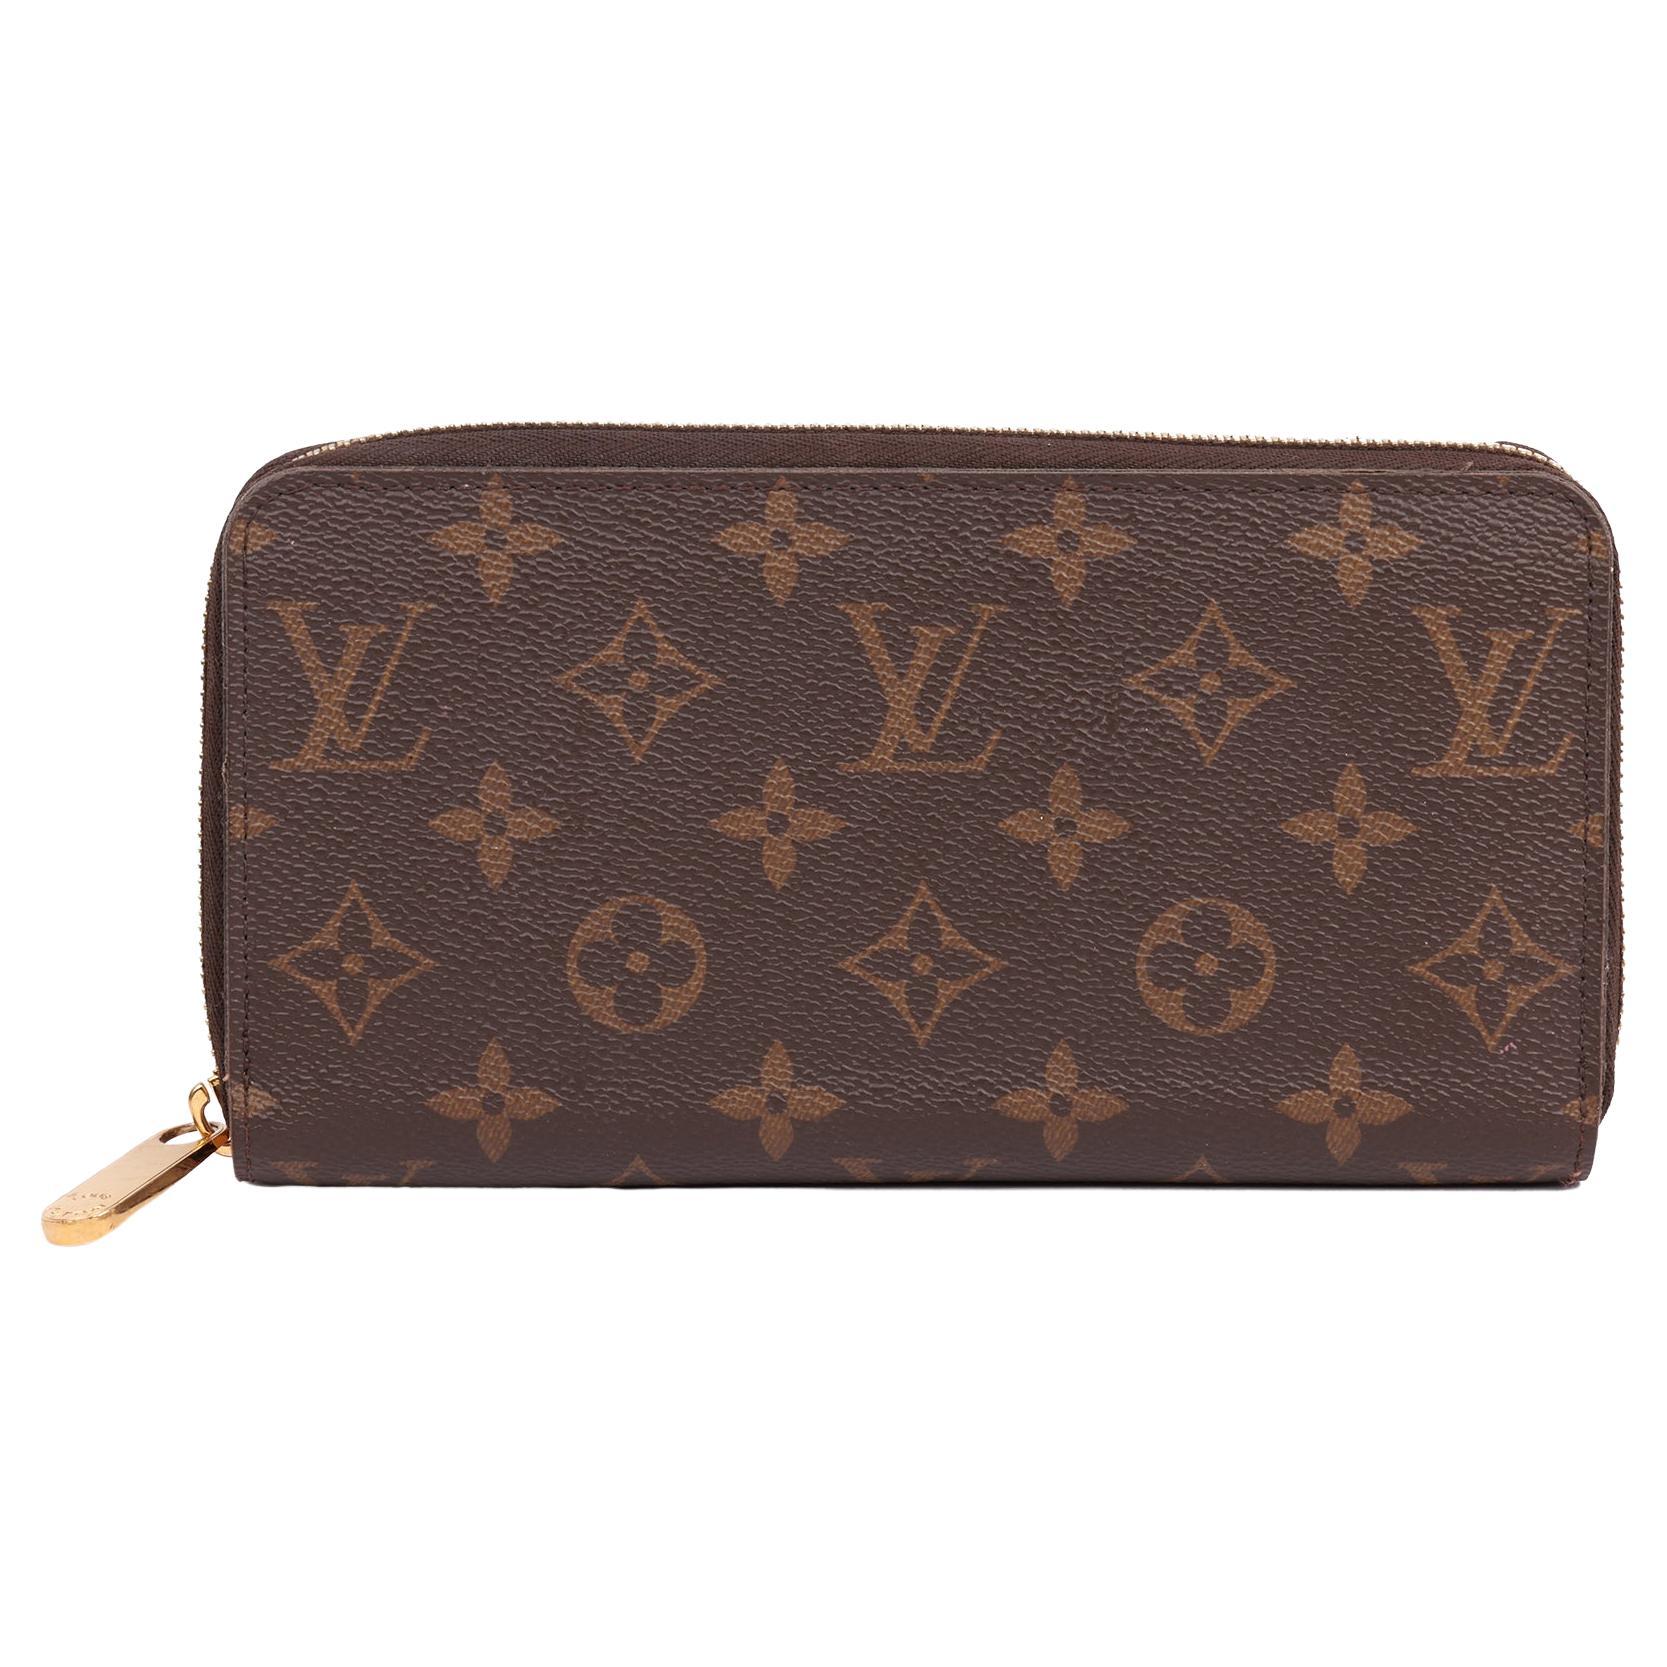 Celeste Wallet Monogram Canvas - Wallets and Small Leather Goods